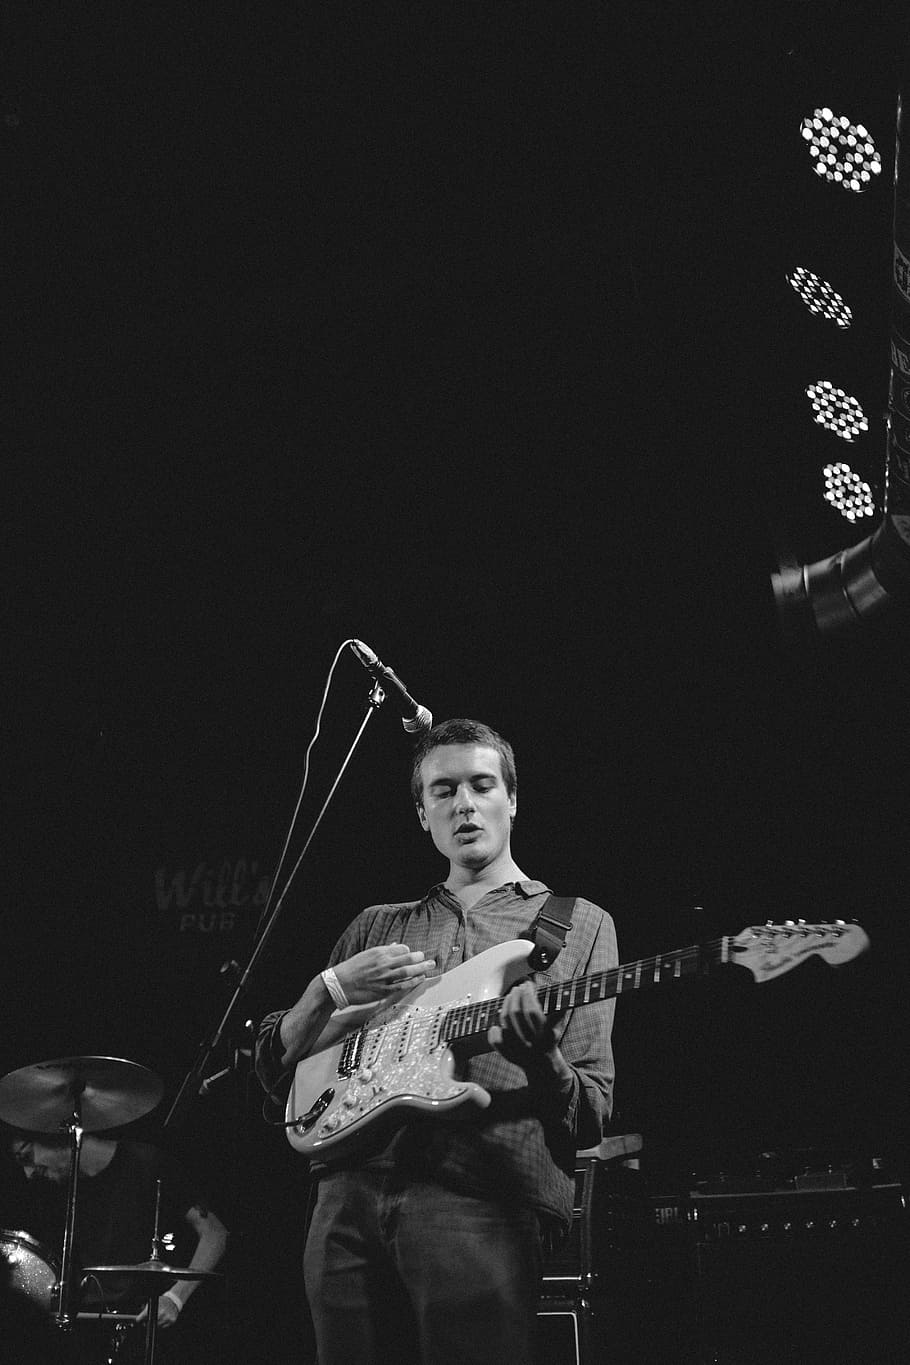 grayscale photography of man playing guitar on stage, grayscale photography of man playing electric guitar